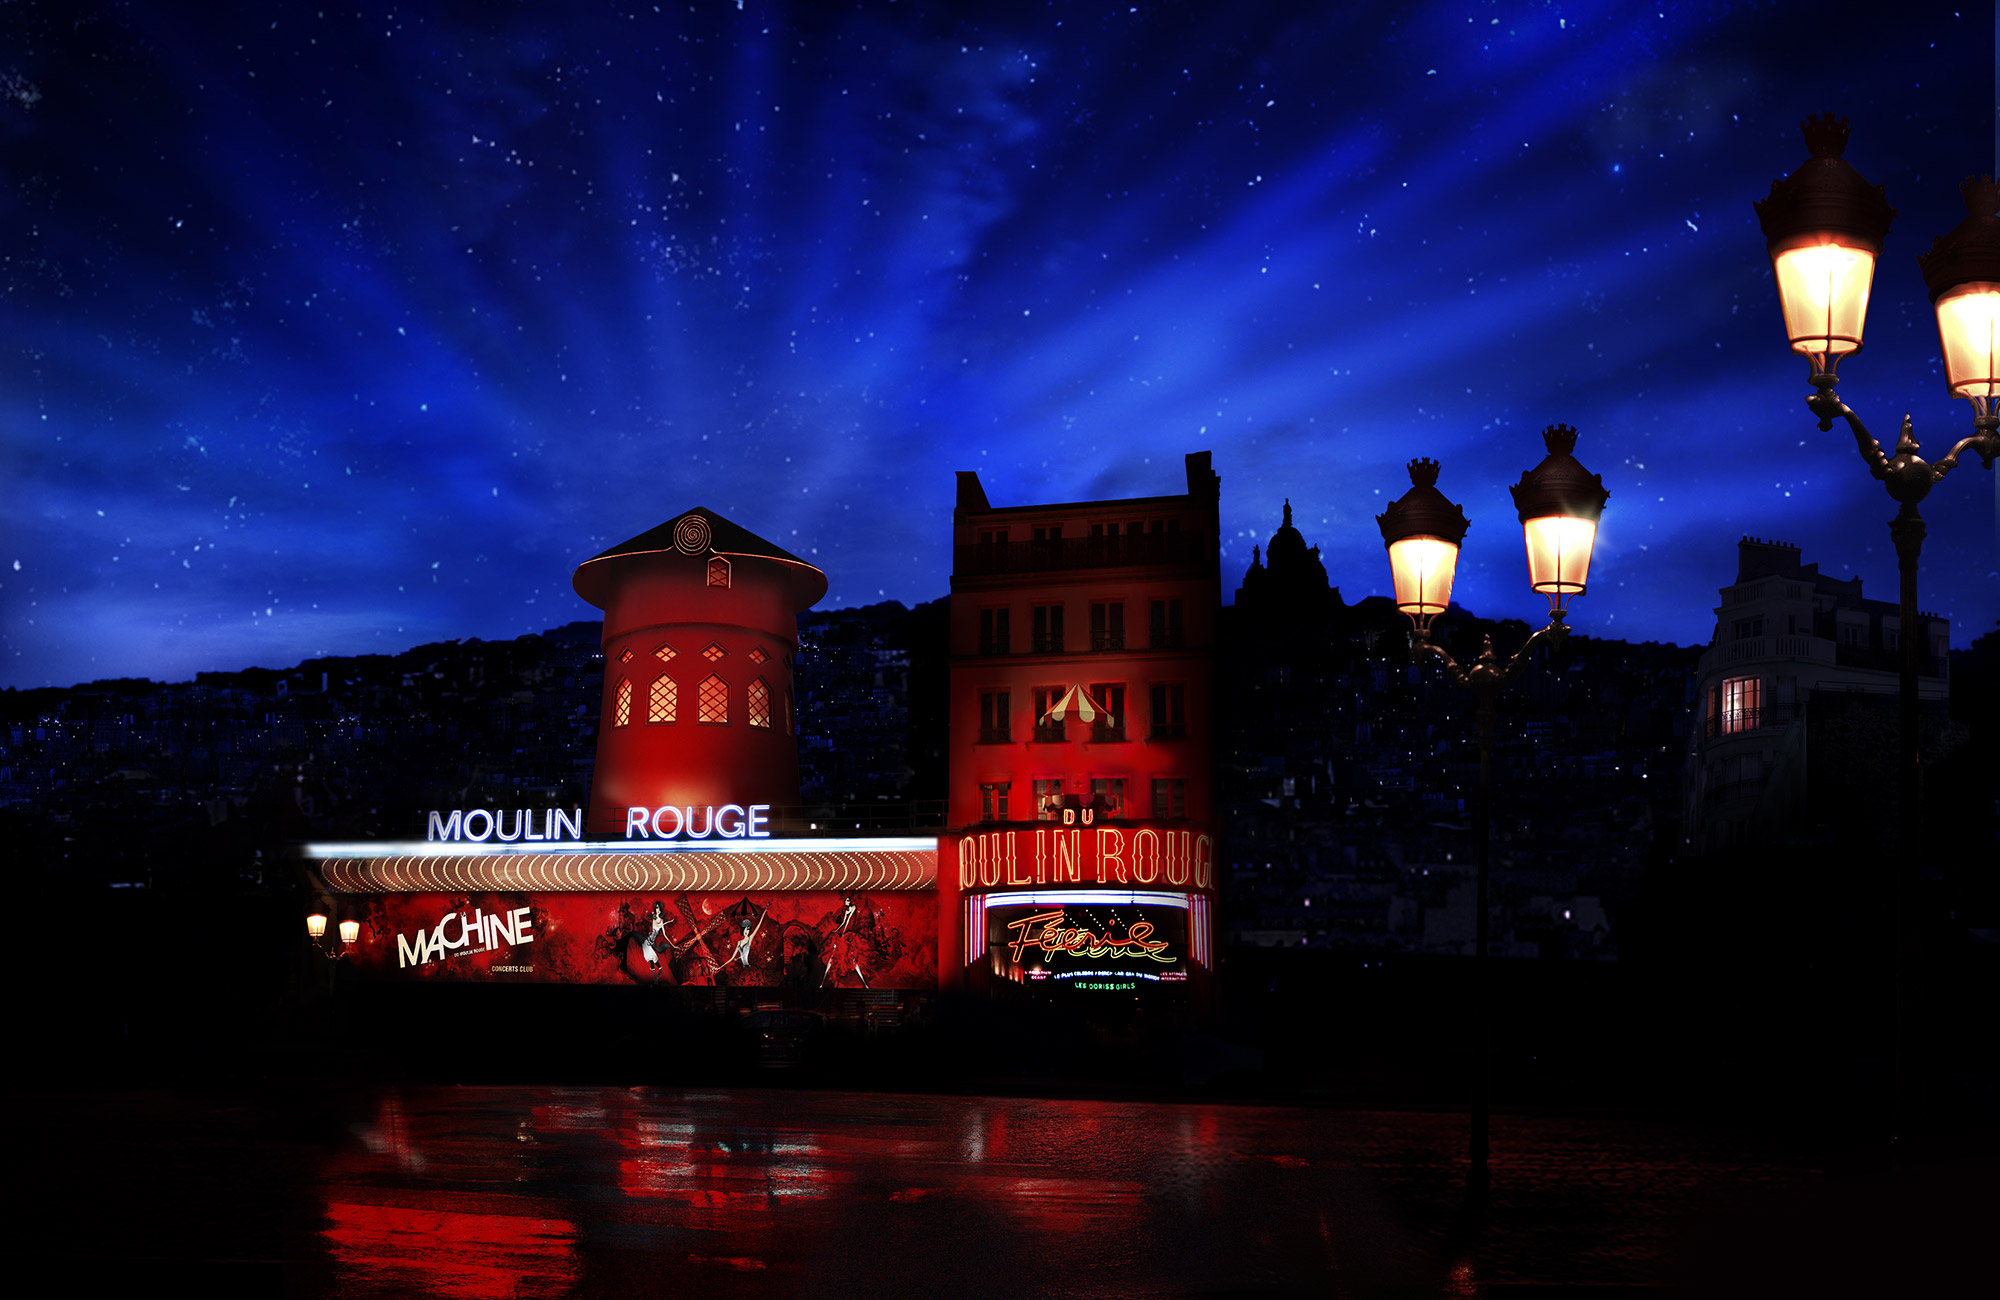 Moulin Rouge! #5